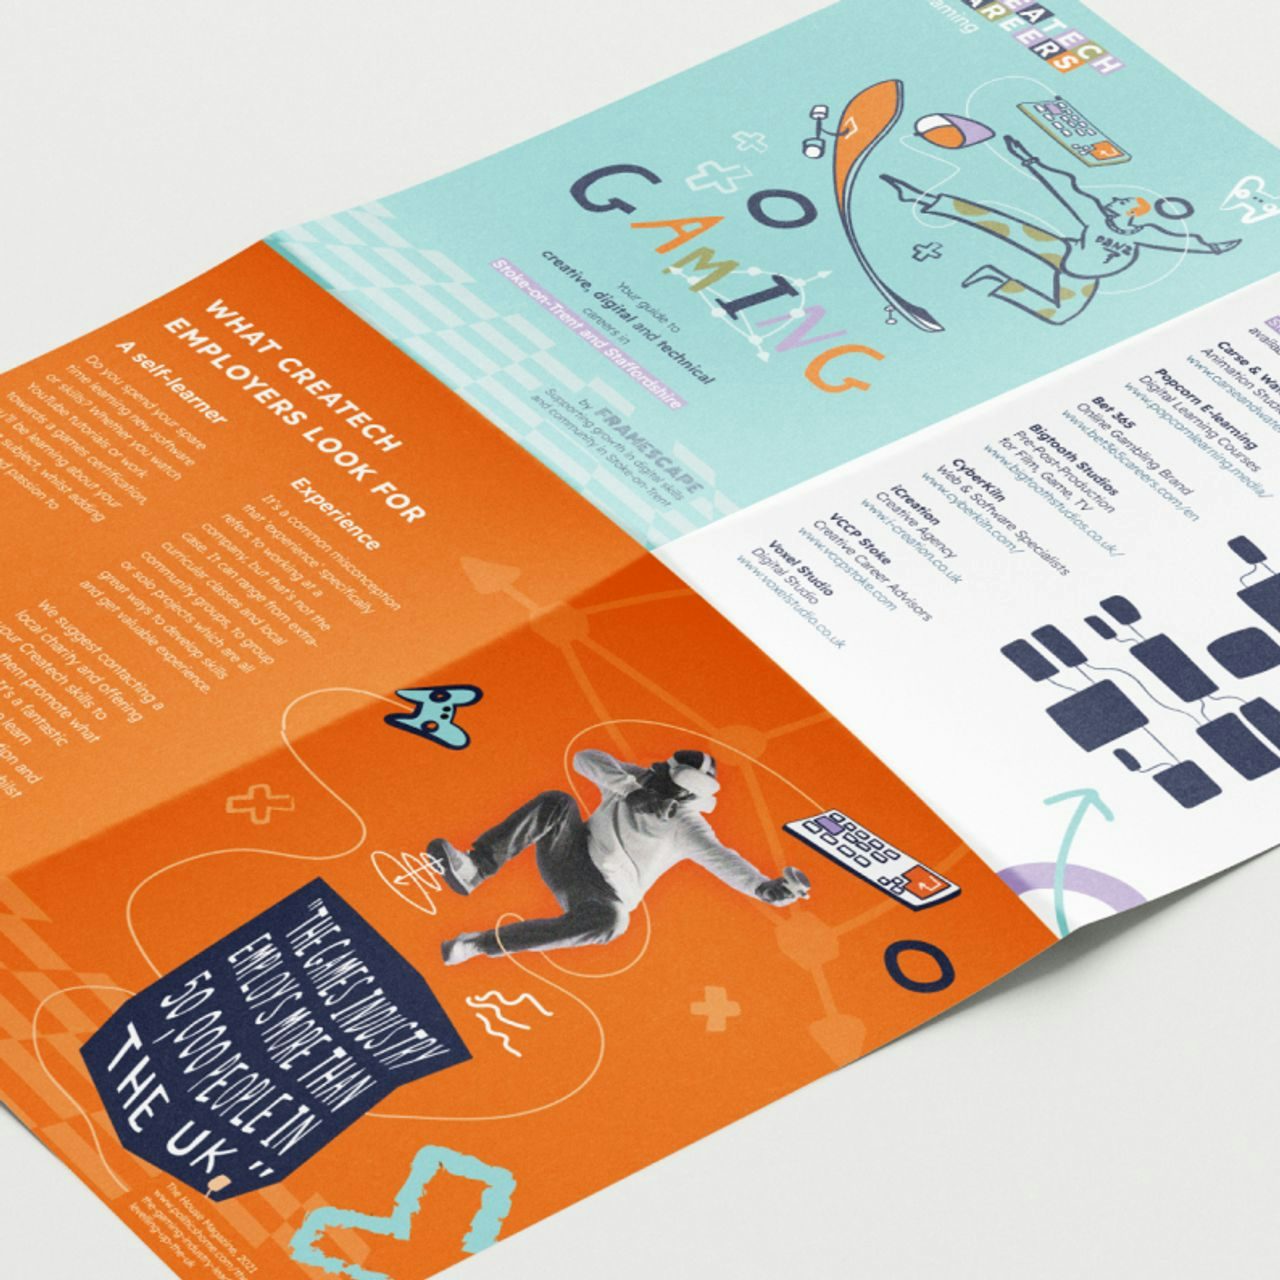 Brochure mockup highlighting the gaming industry, with illustrations and facts about creative employment and the value of gaming in the UK.